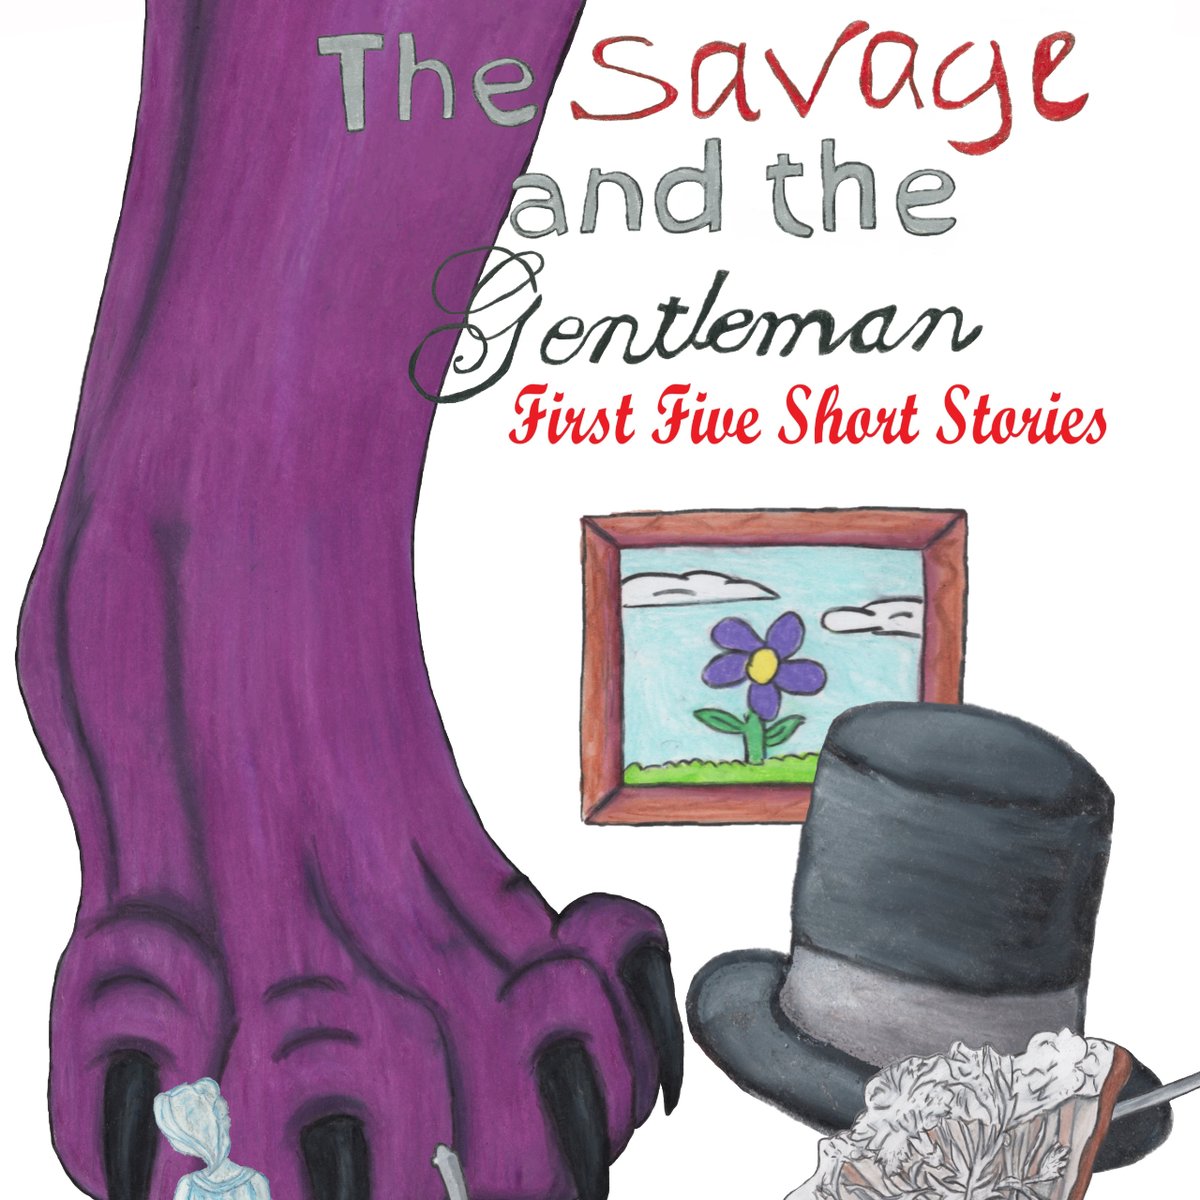 The Savage and the Gentleman First Five Short Stories by Alice Fay Wilds can be found on Amazon! #acornneighbors #alicefaywilds #books #youngadultbooks #shortstory #fantasybook